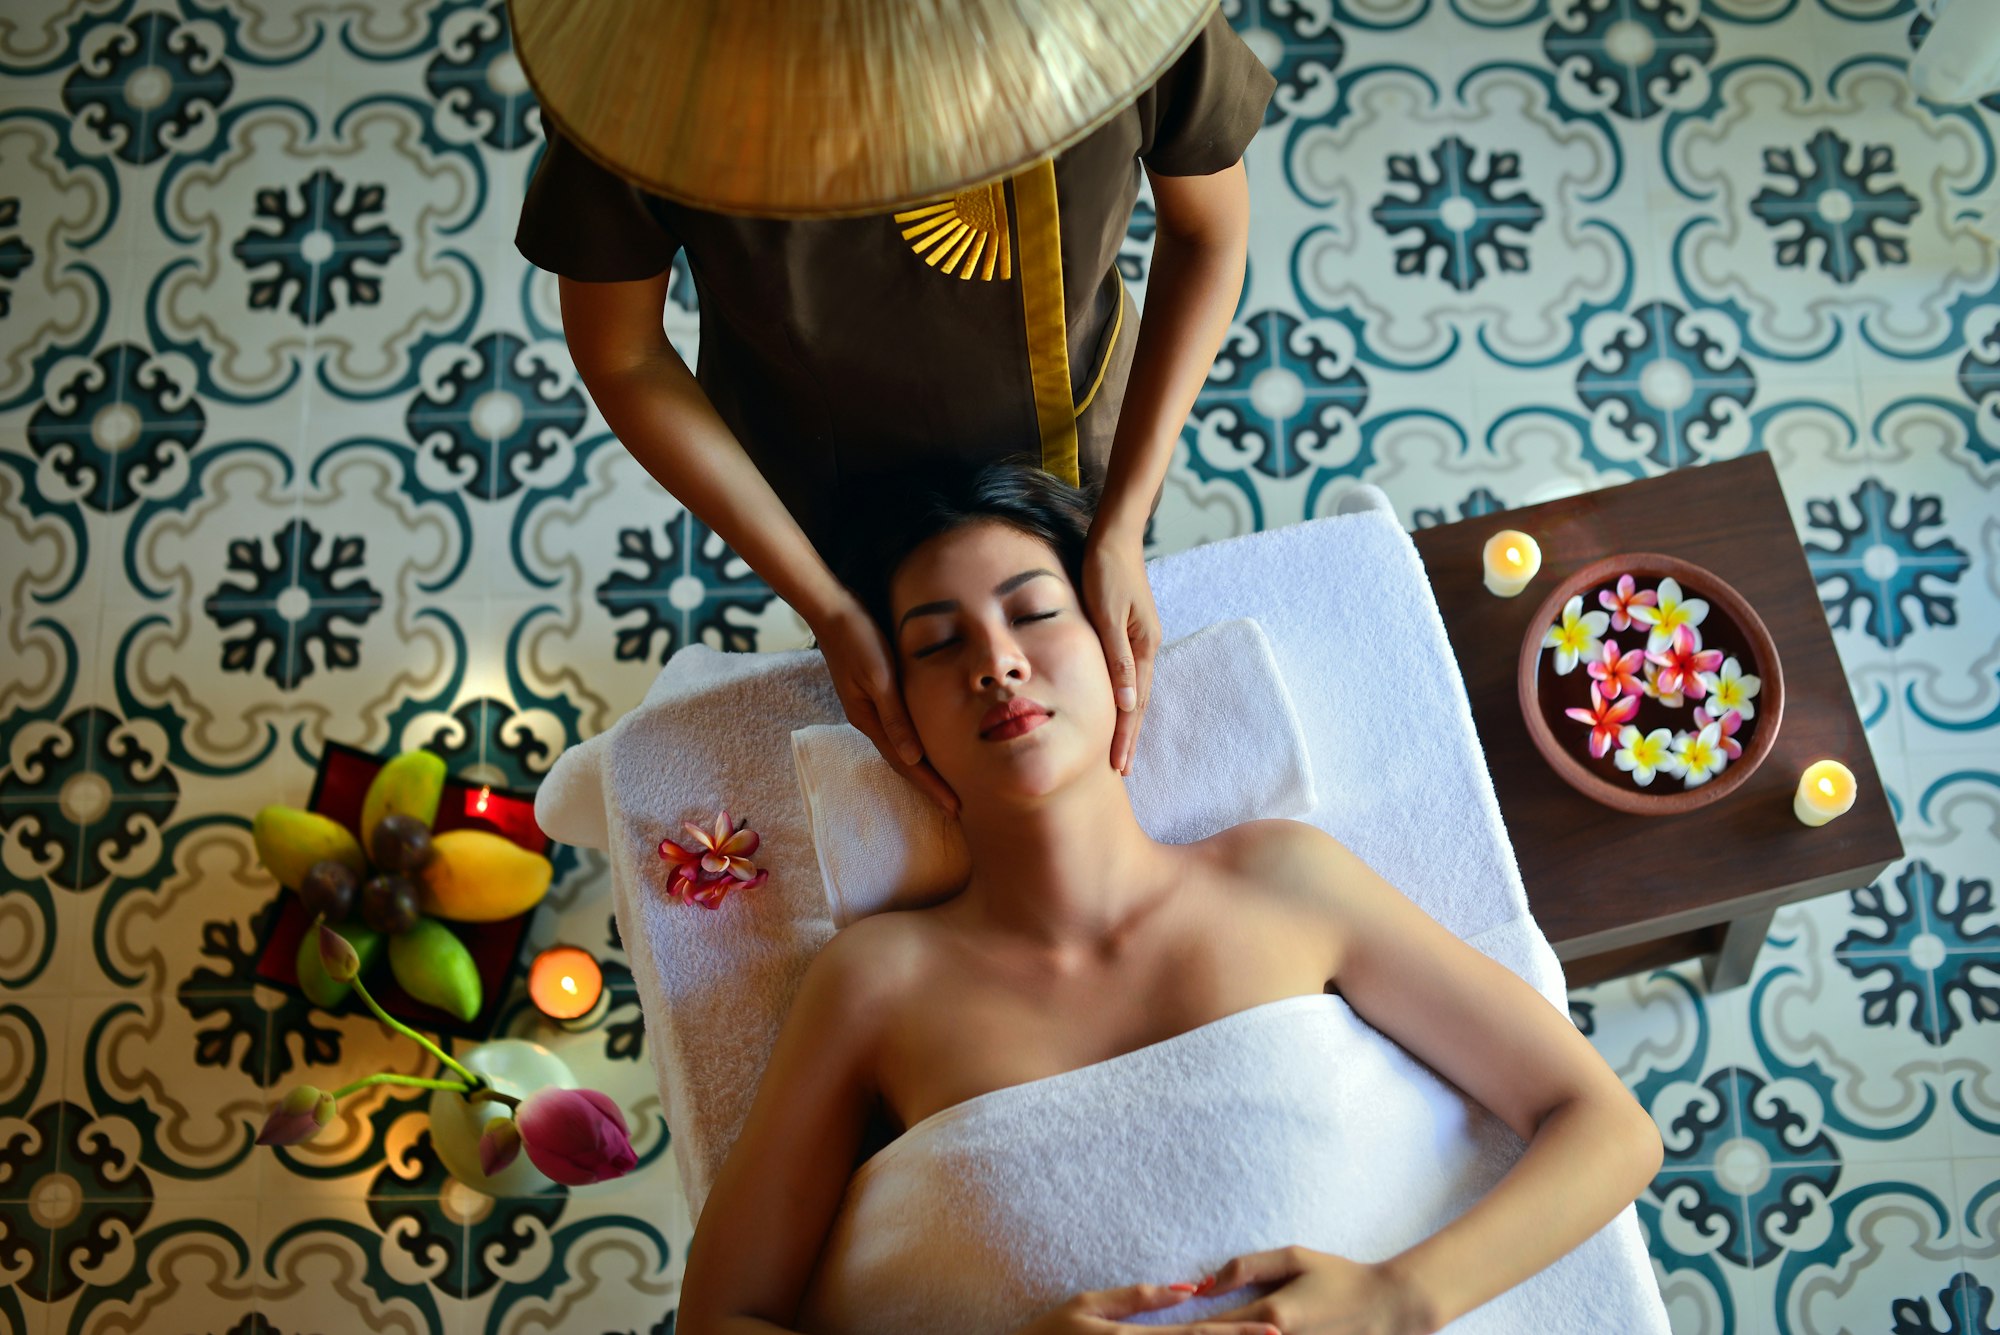 Marina Bay's Best Spas and Wellness Centers: Our Top Picks!